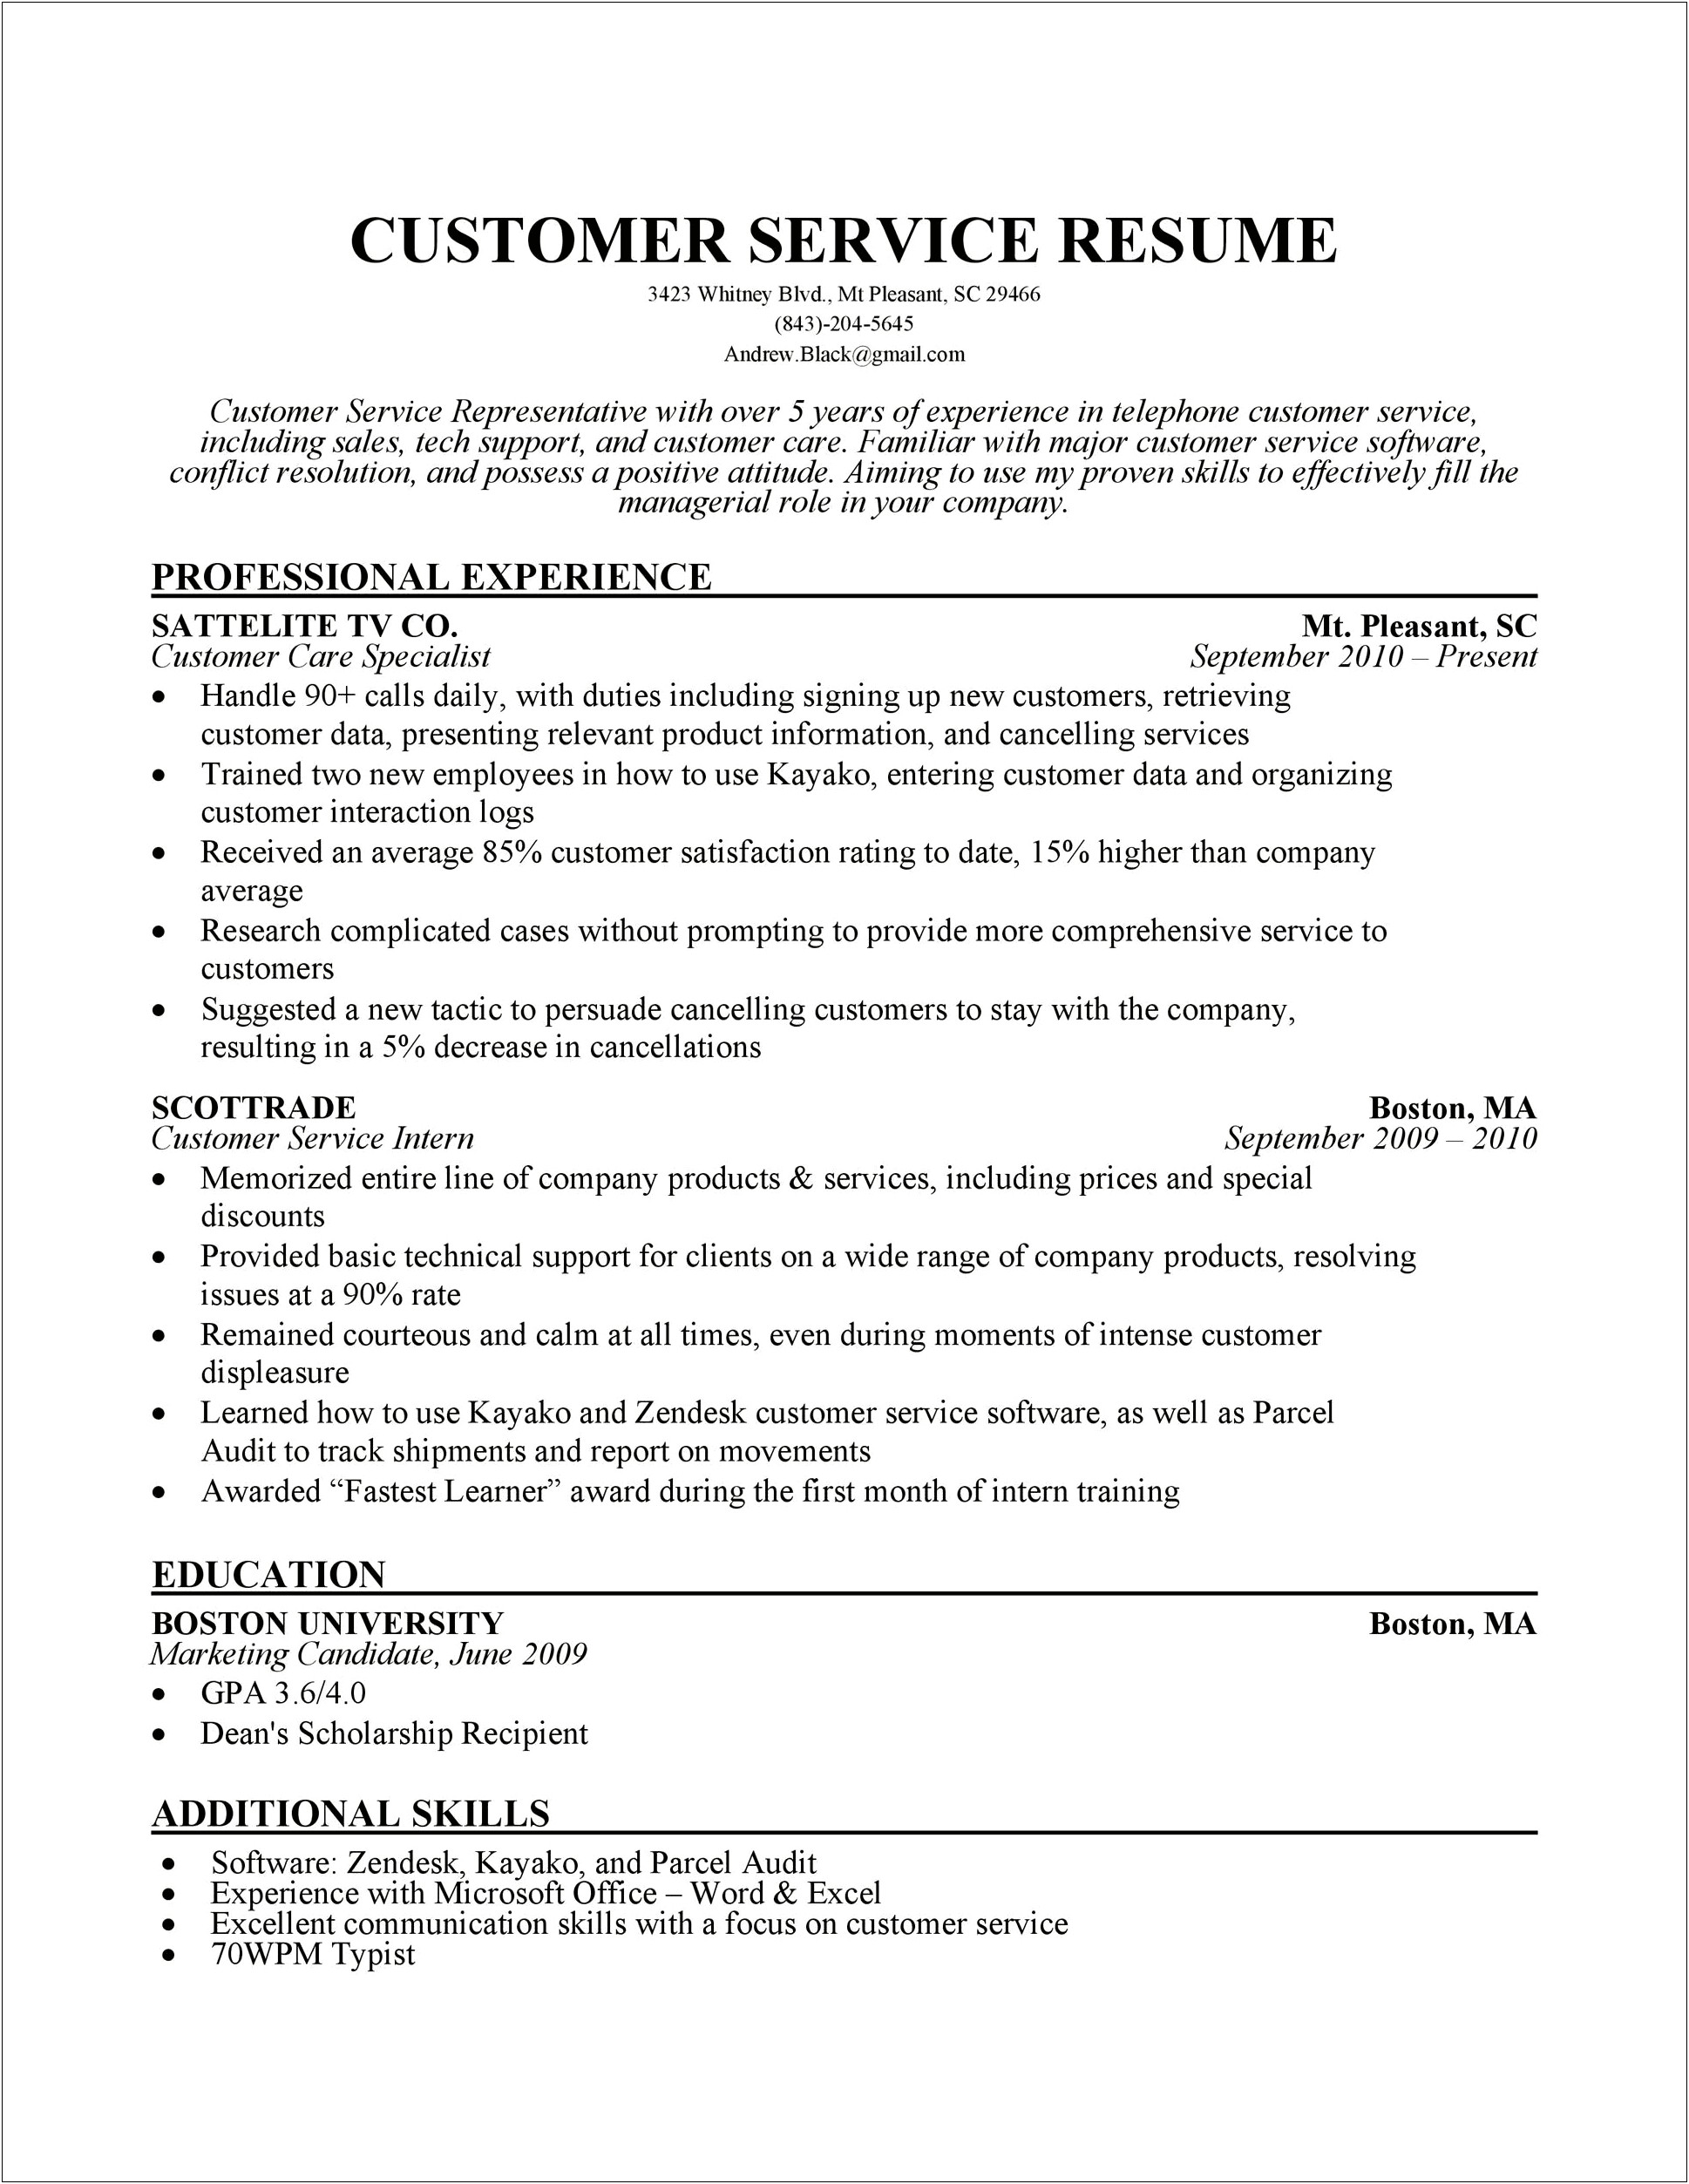 Dynamic Resume Word For Customer Service